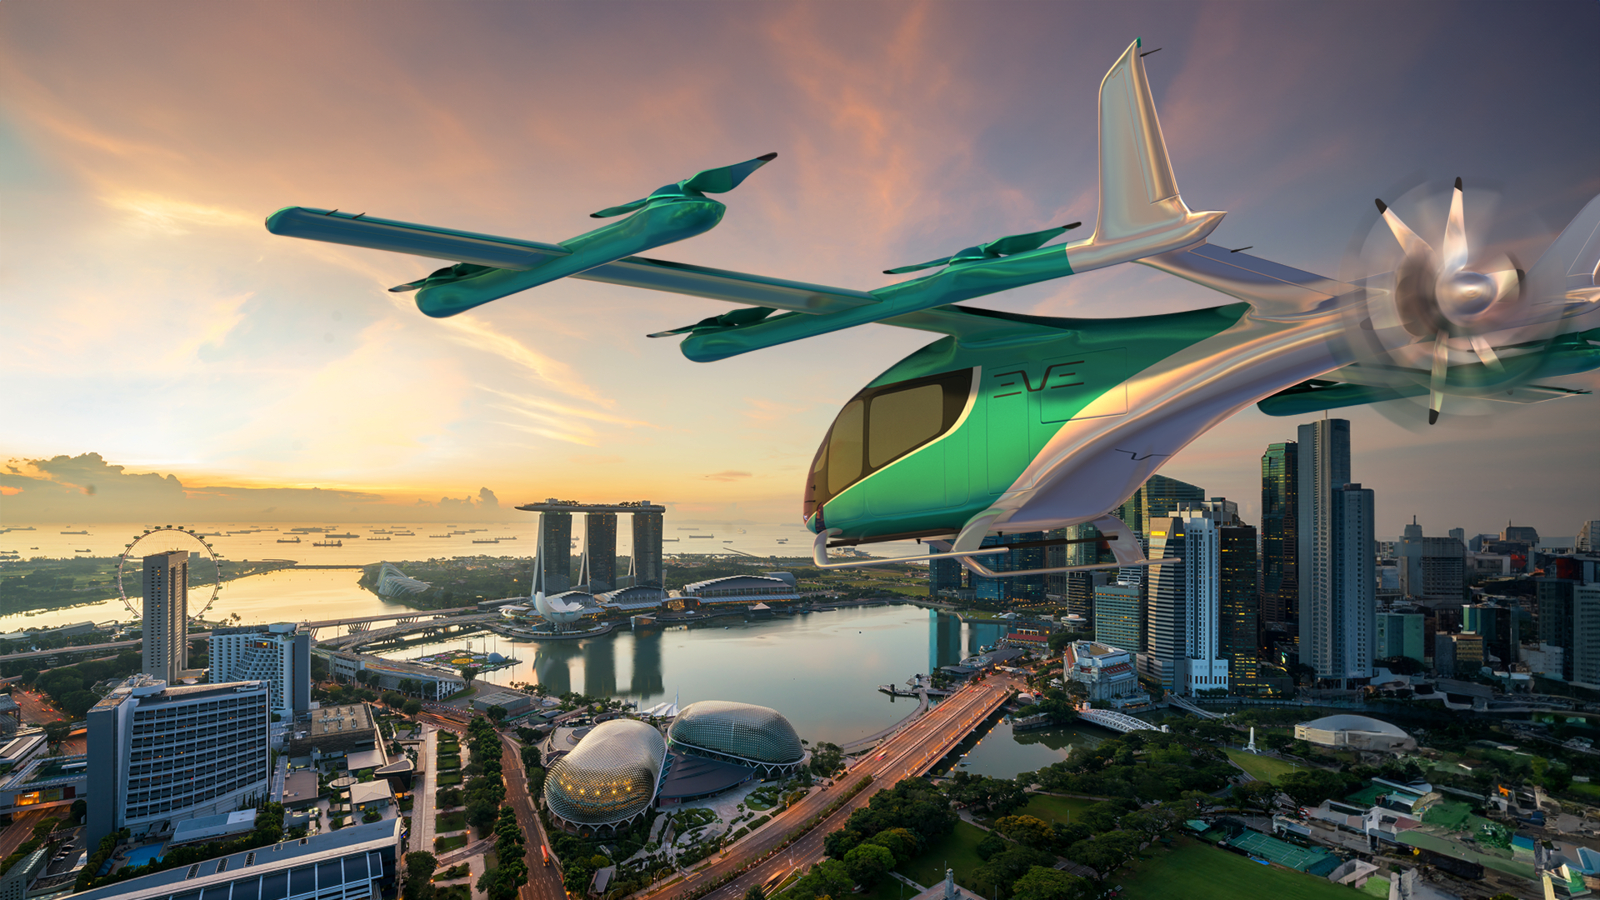 Eve Air Mobility Debuts at Singapore Airshow